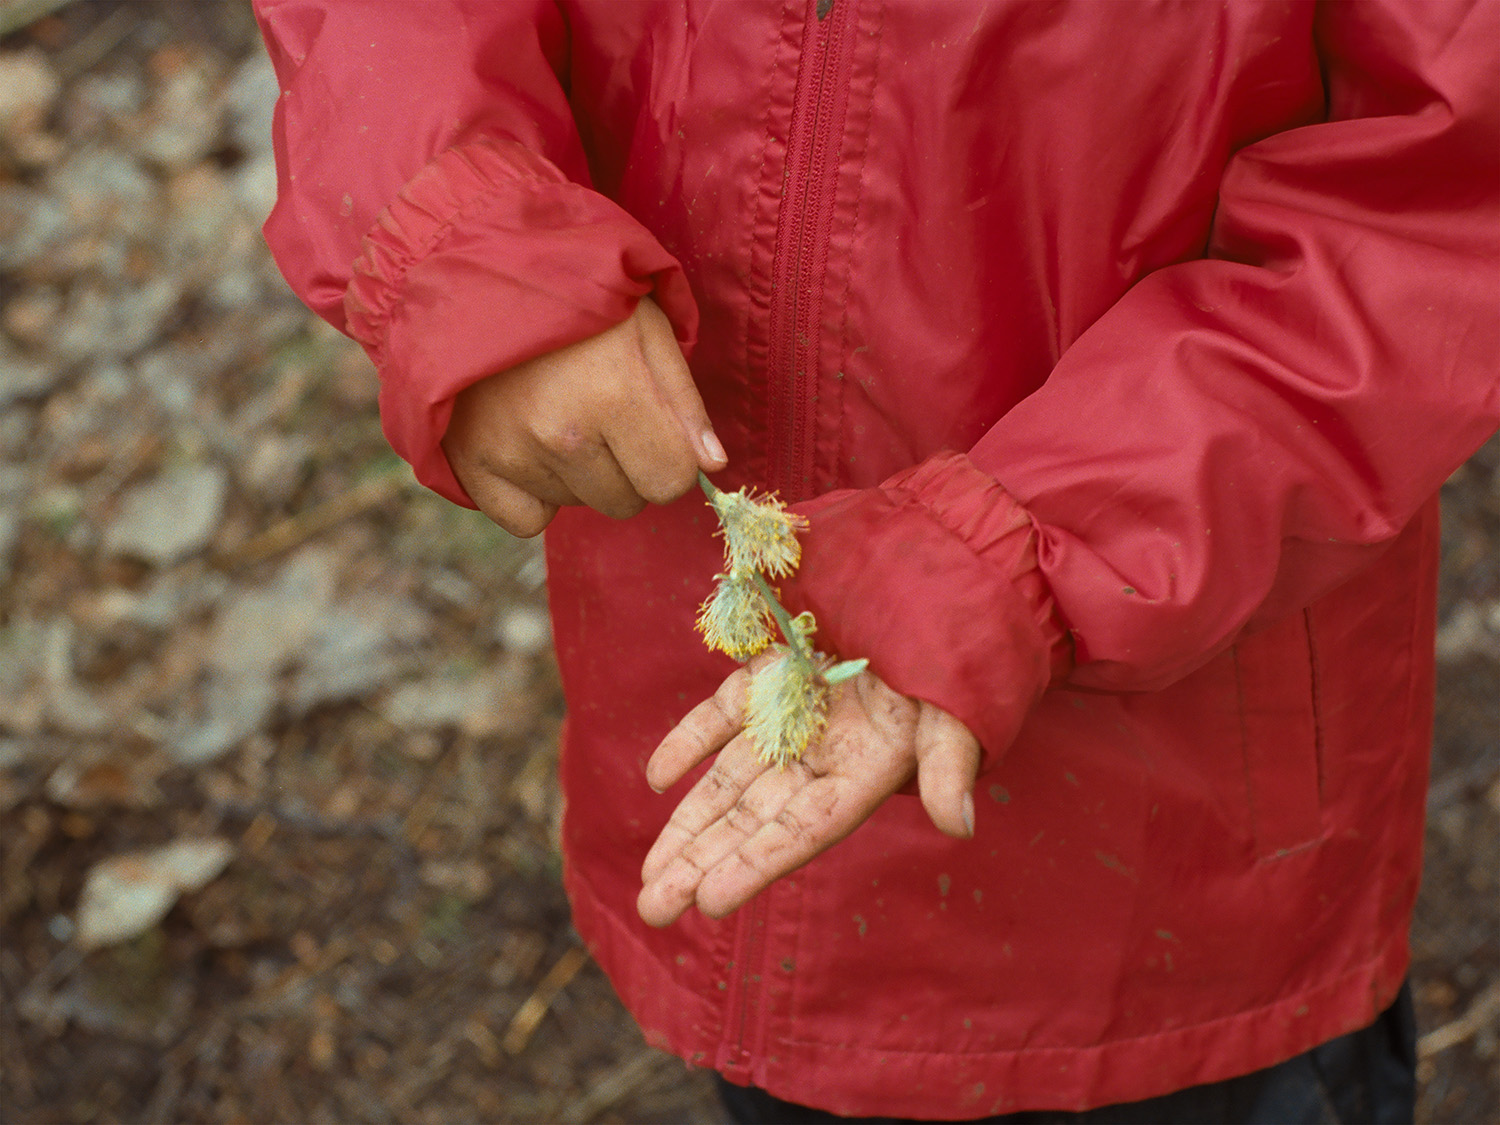 We know a better word than happy, video still, child holding willow catkins